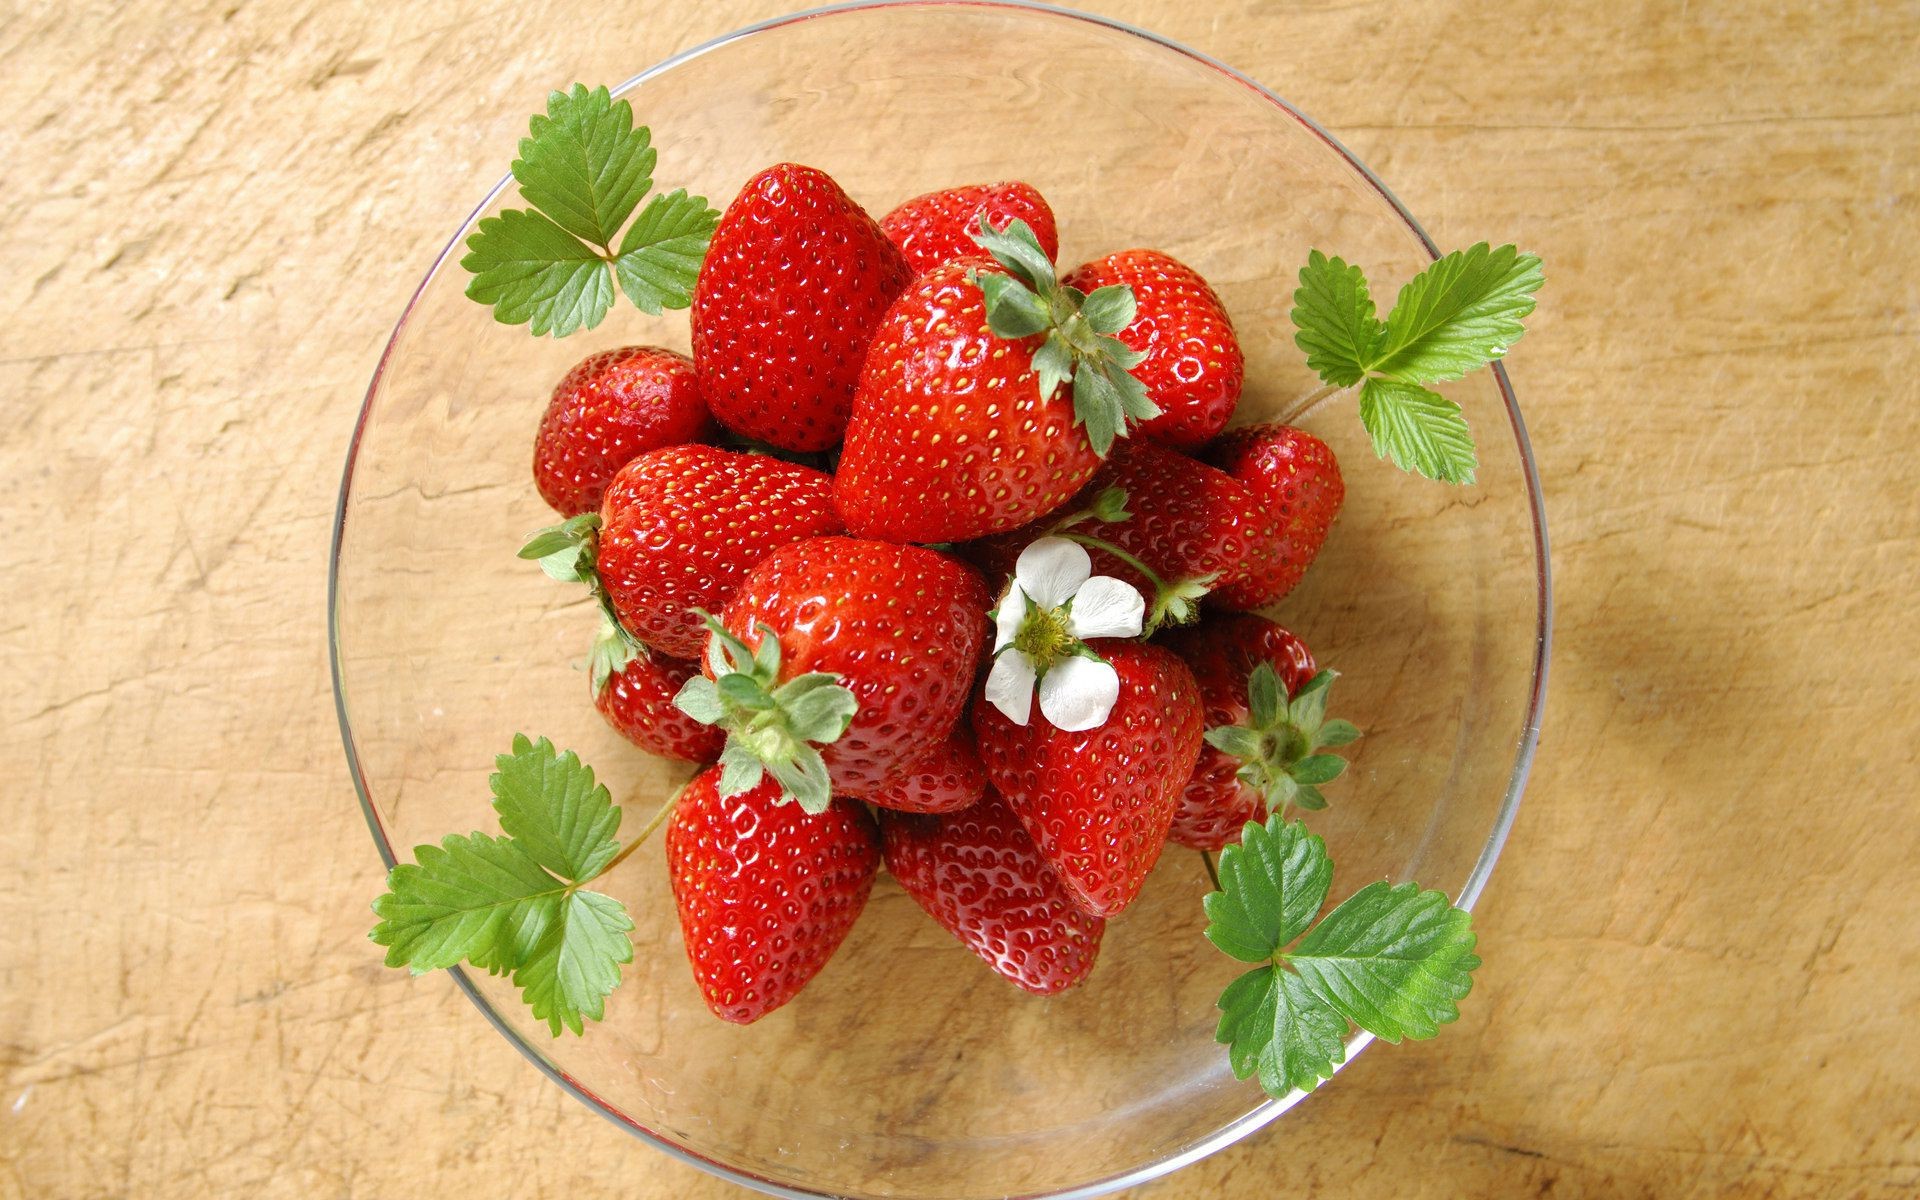 berries strawberry berry fruit food healthy leaf juicy sweet delicious health tasty refreshment nutrition confection diet bowl grow mint close-up